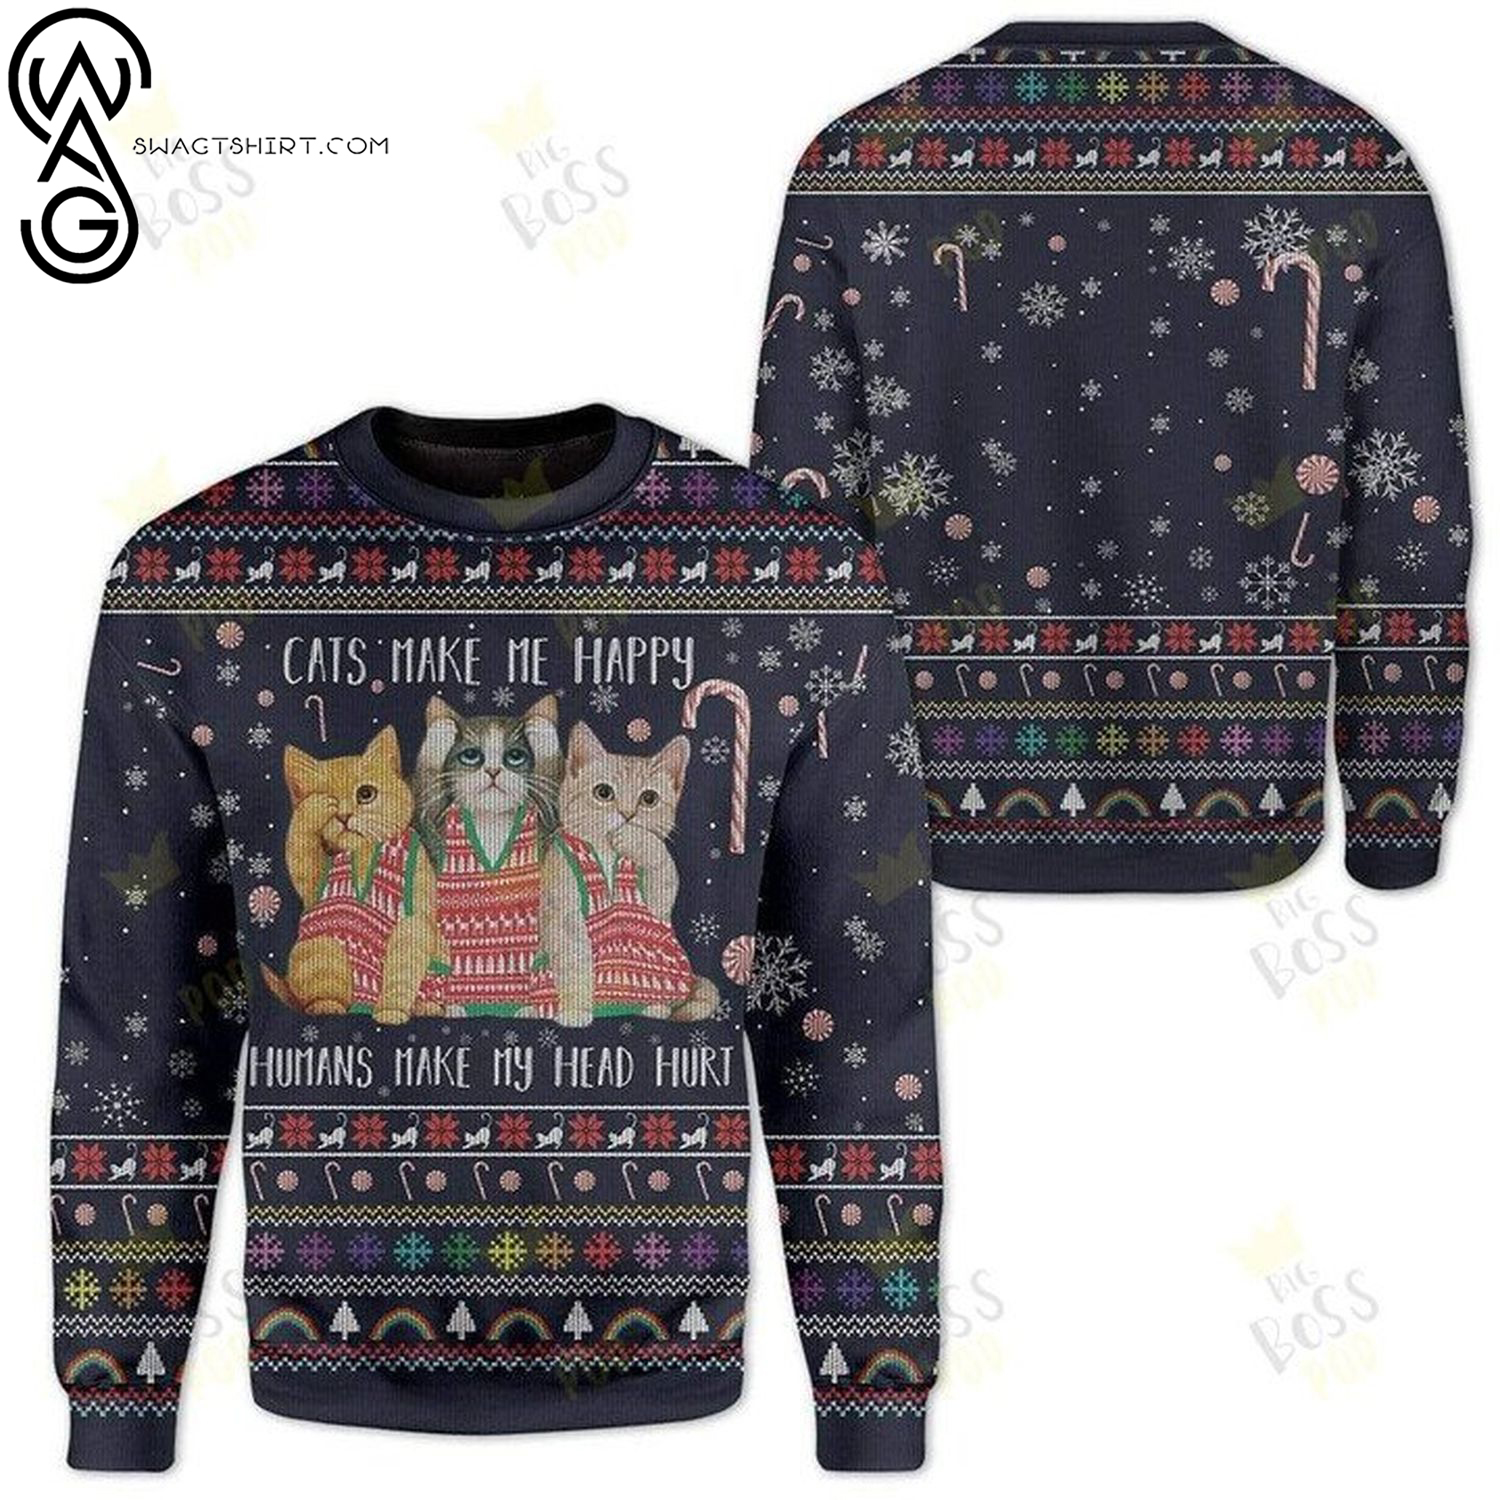 Cats make me happy humans make my head hurt ugly christmas sweater